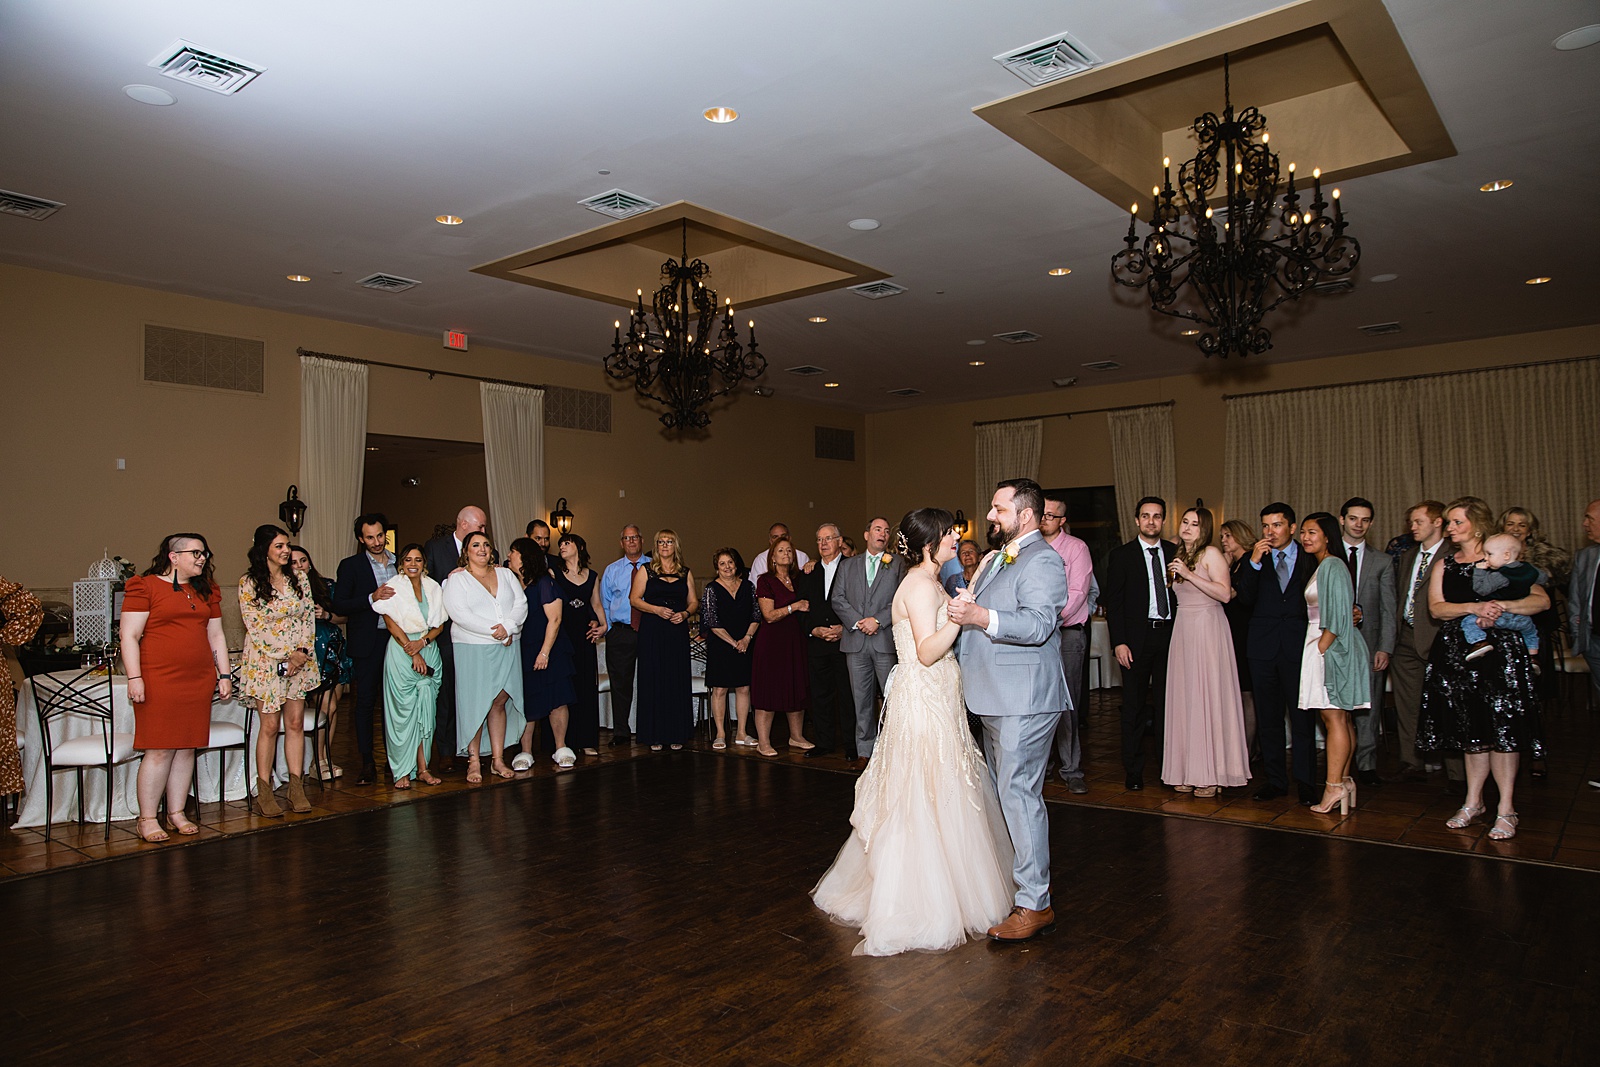 Bride and Groom sharing first dance at their Bella Rose Estate wedding reception by Arizona wedding photographer PMA Photography.